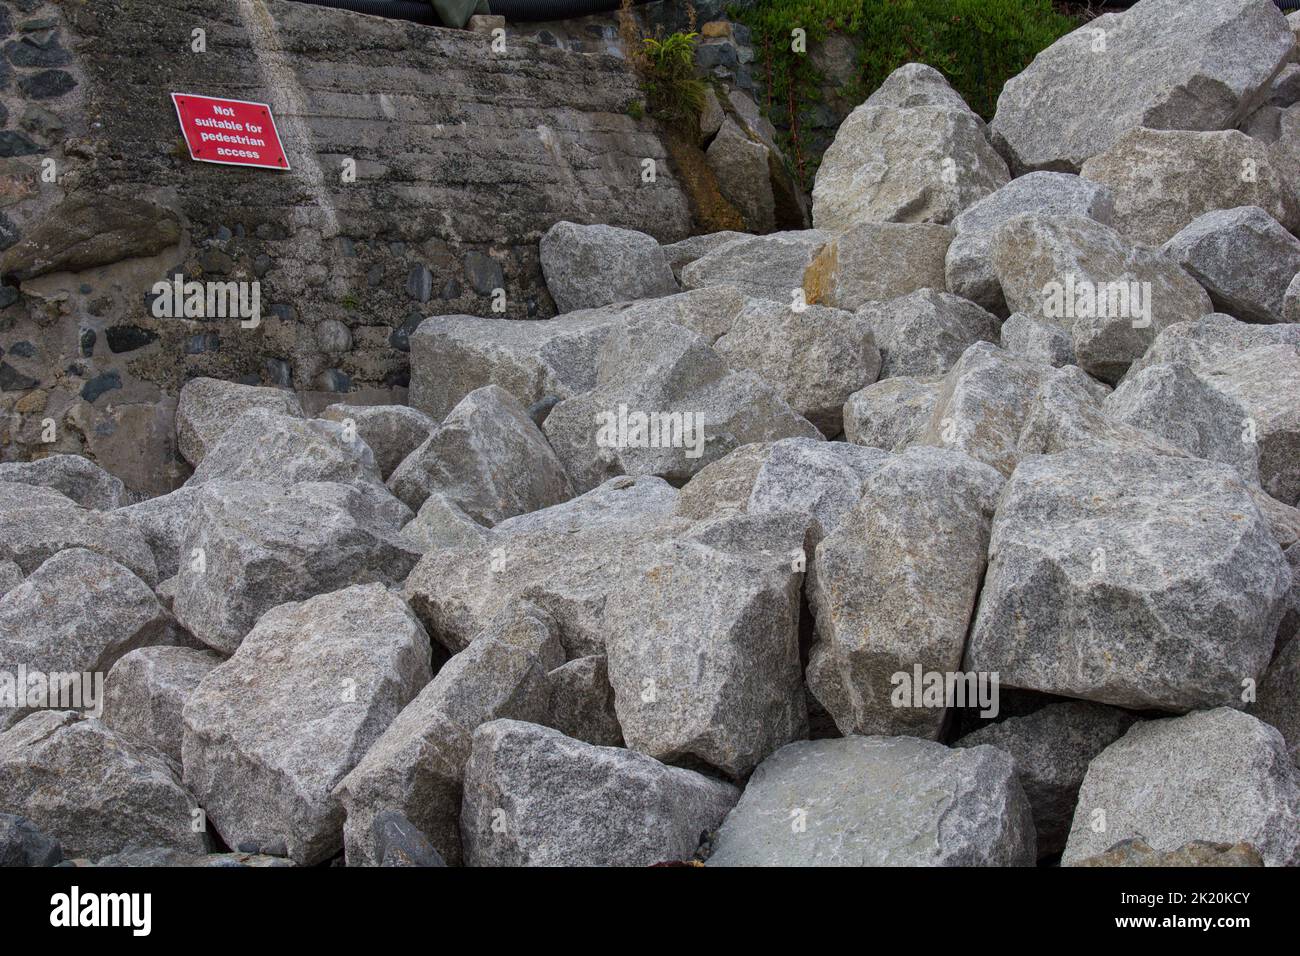 Rock armour transported to Coverack Bay, Cornwall.  To reinforce the sea wall against storm damage and erosion. Ironic sign warning pedestrians. Stock Photo